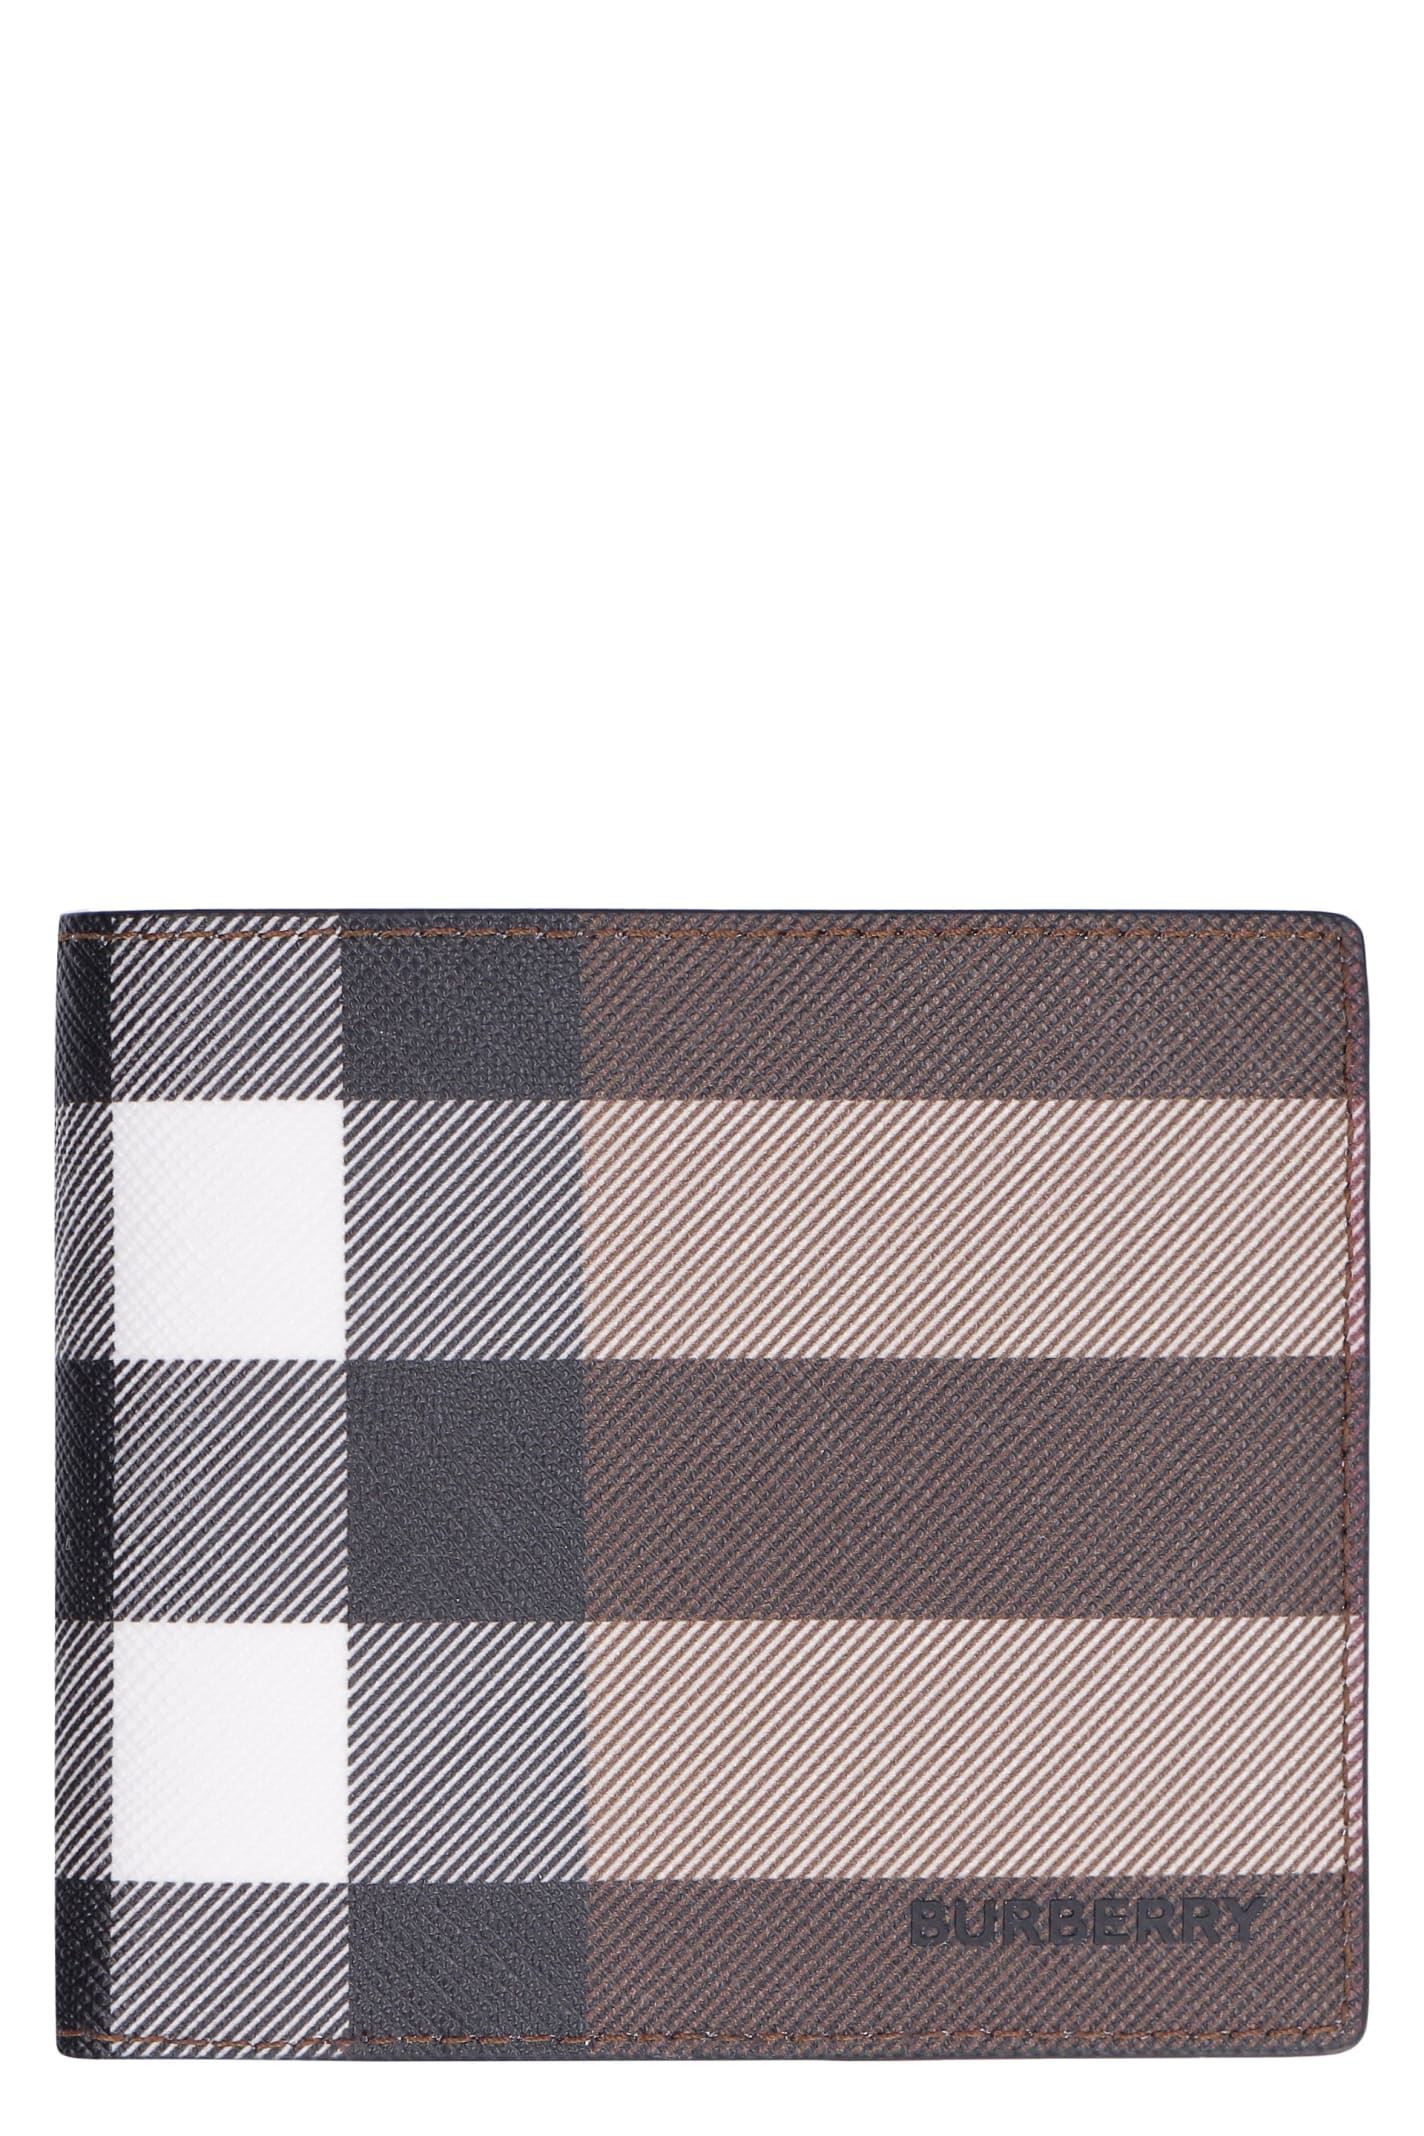 Burberry Checked Print Fabric Flap-over Wallet In Brown